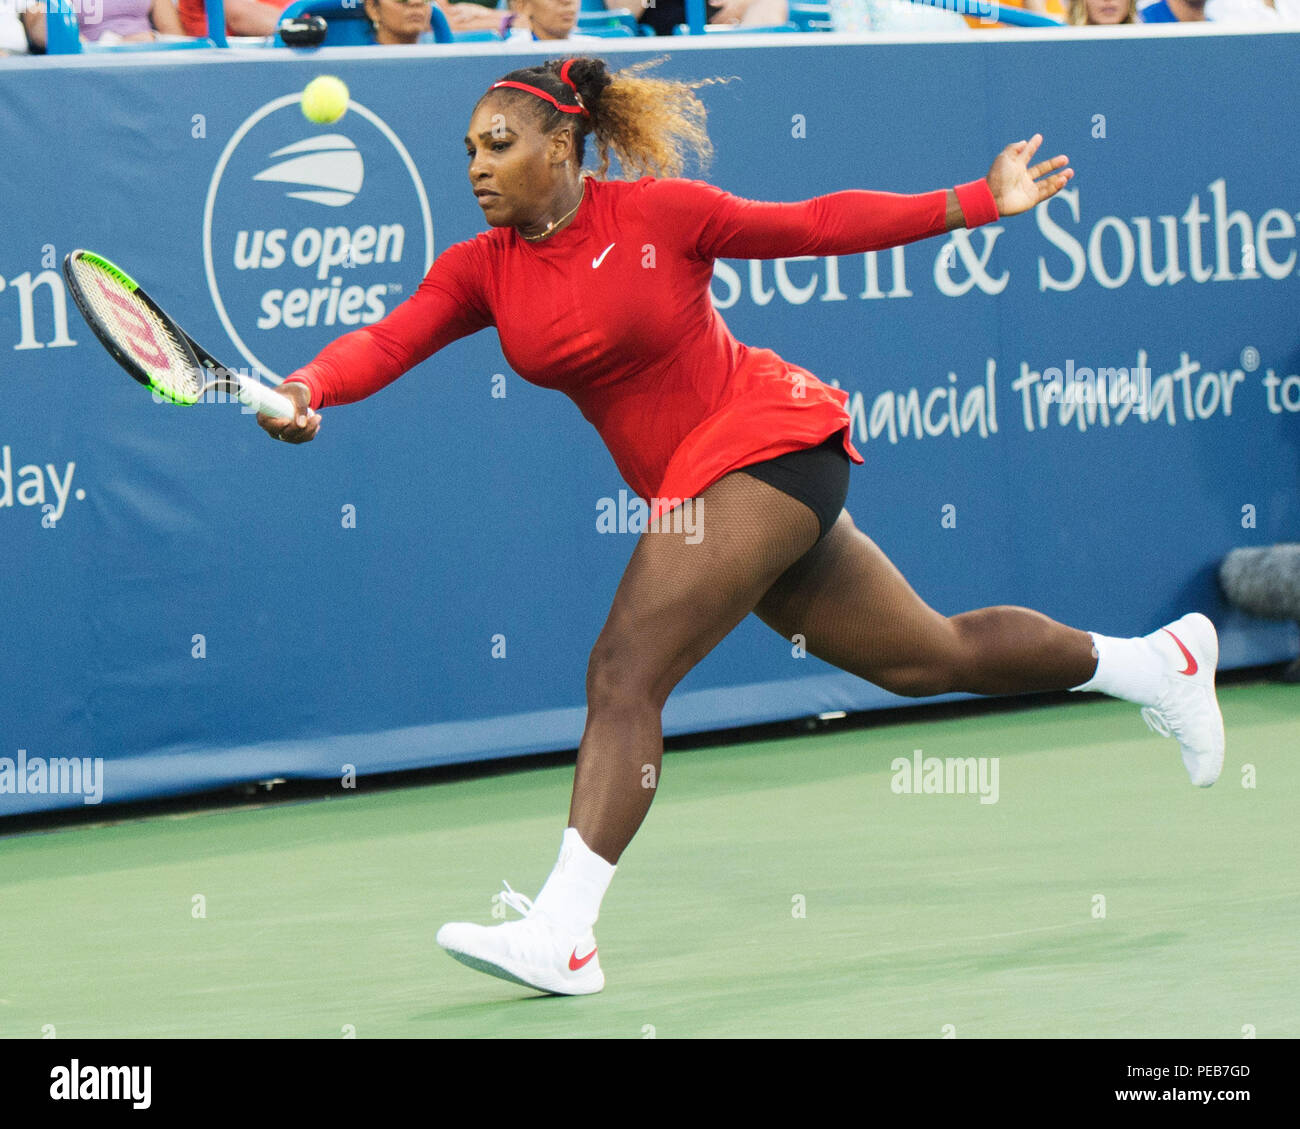 Mason, Ohio, USA. August 13, 2018: Serena Wiliams (USA) hits the ball back to Daria Gavrilova (AUS) at the Western Southern Open in Brent Clark/Alamy Live News Stock Photo